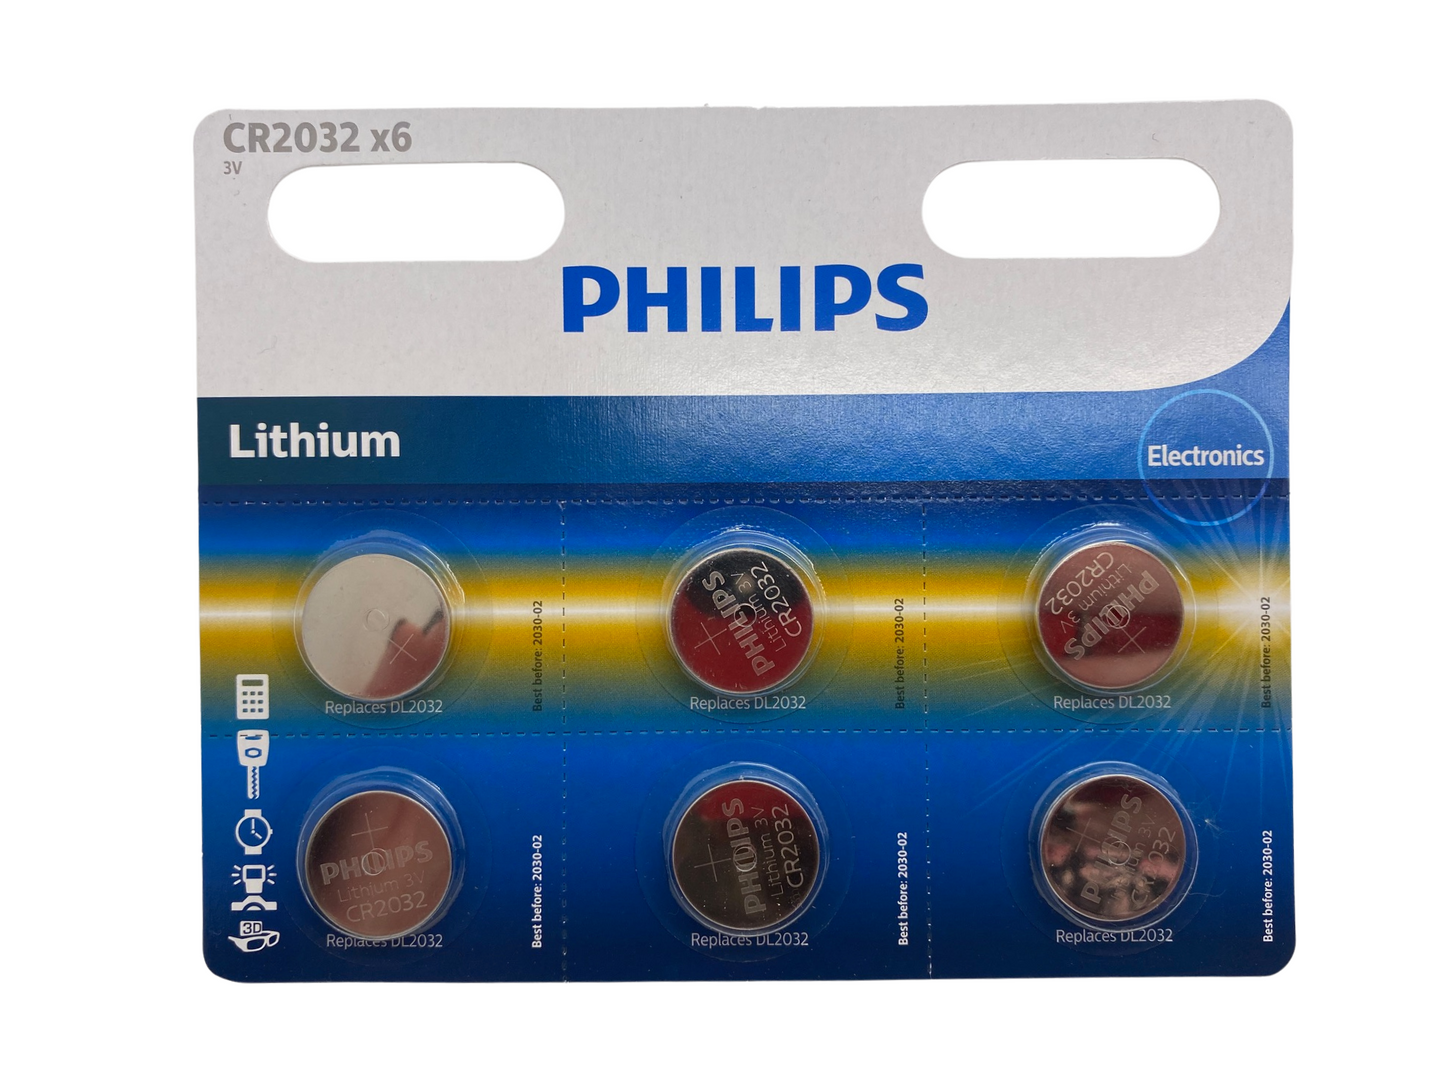 Philips CR2032 Lithium Cell Battery 6 Pack